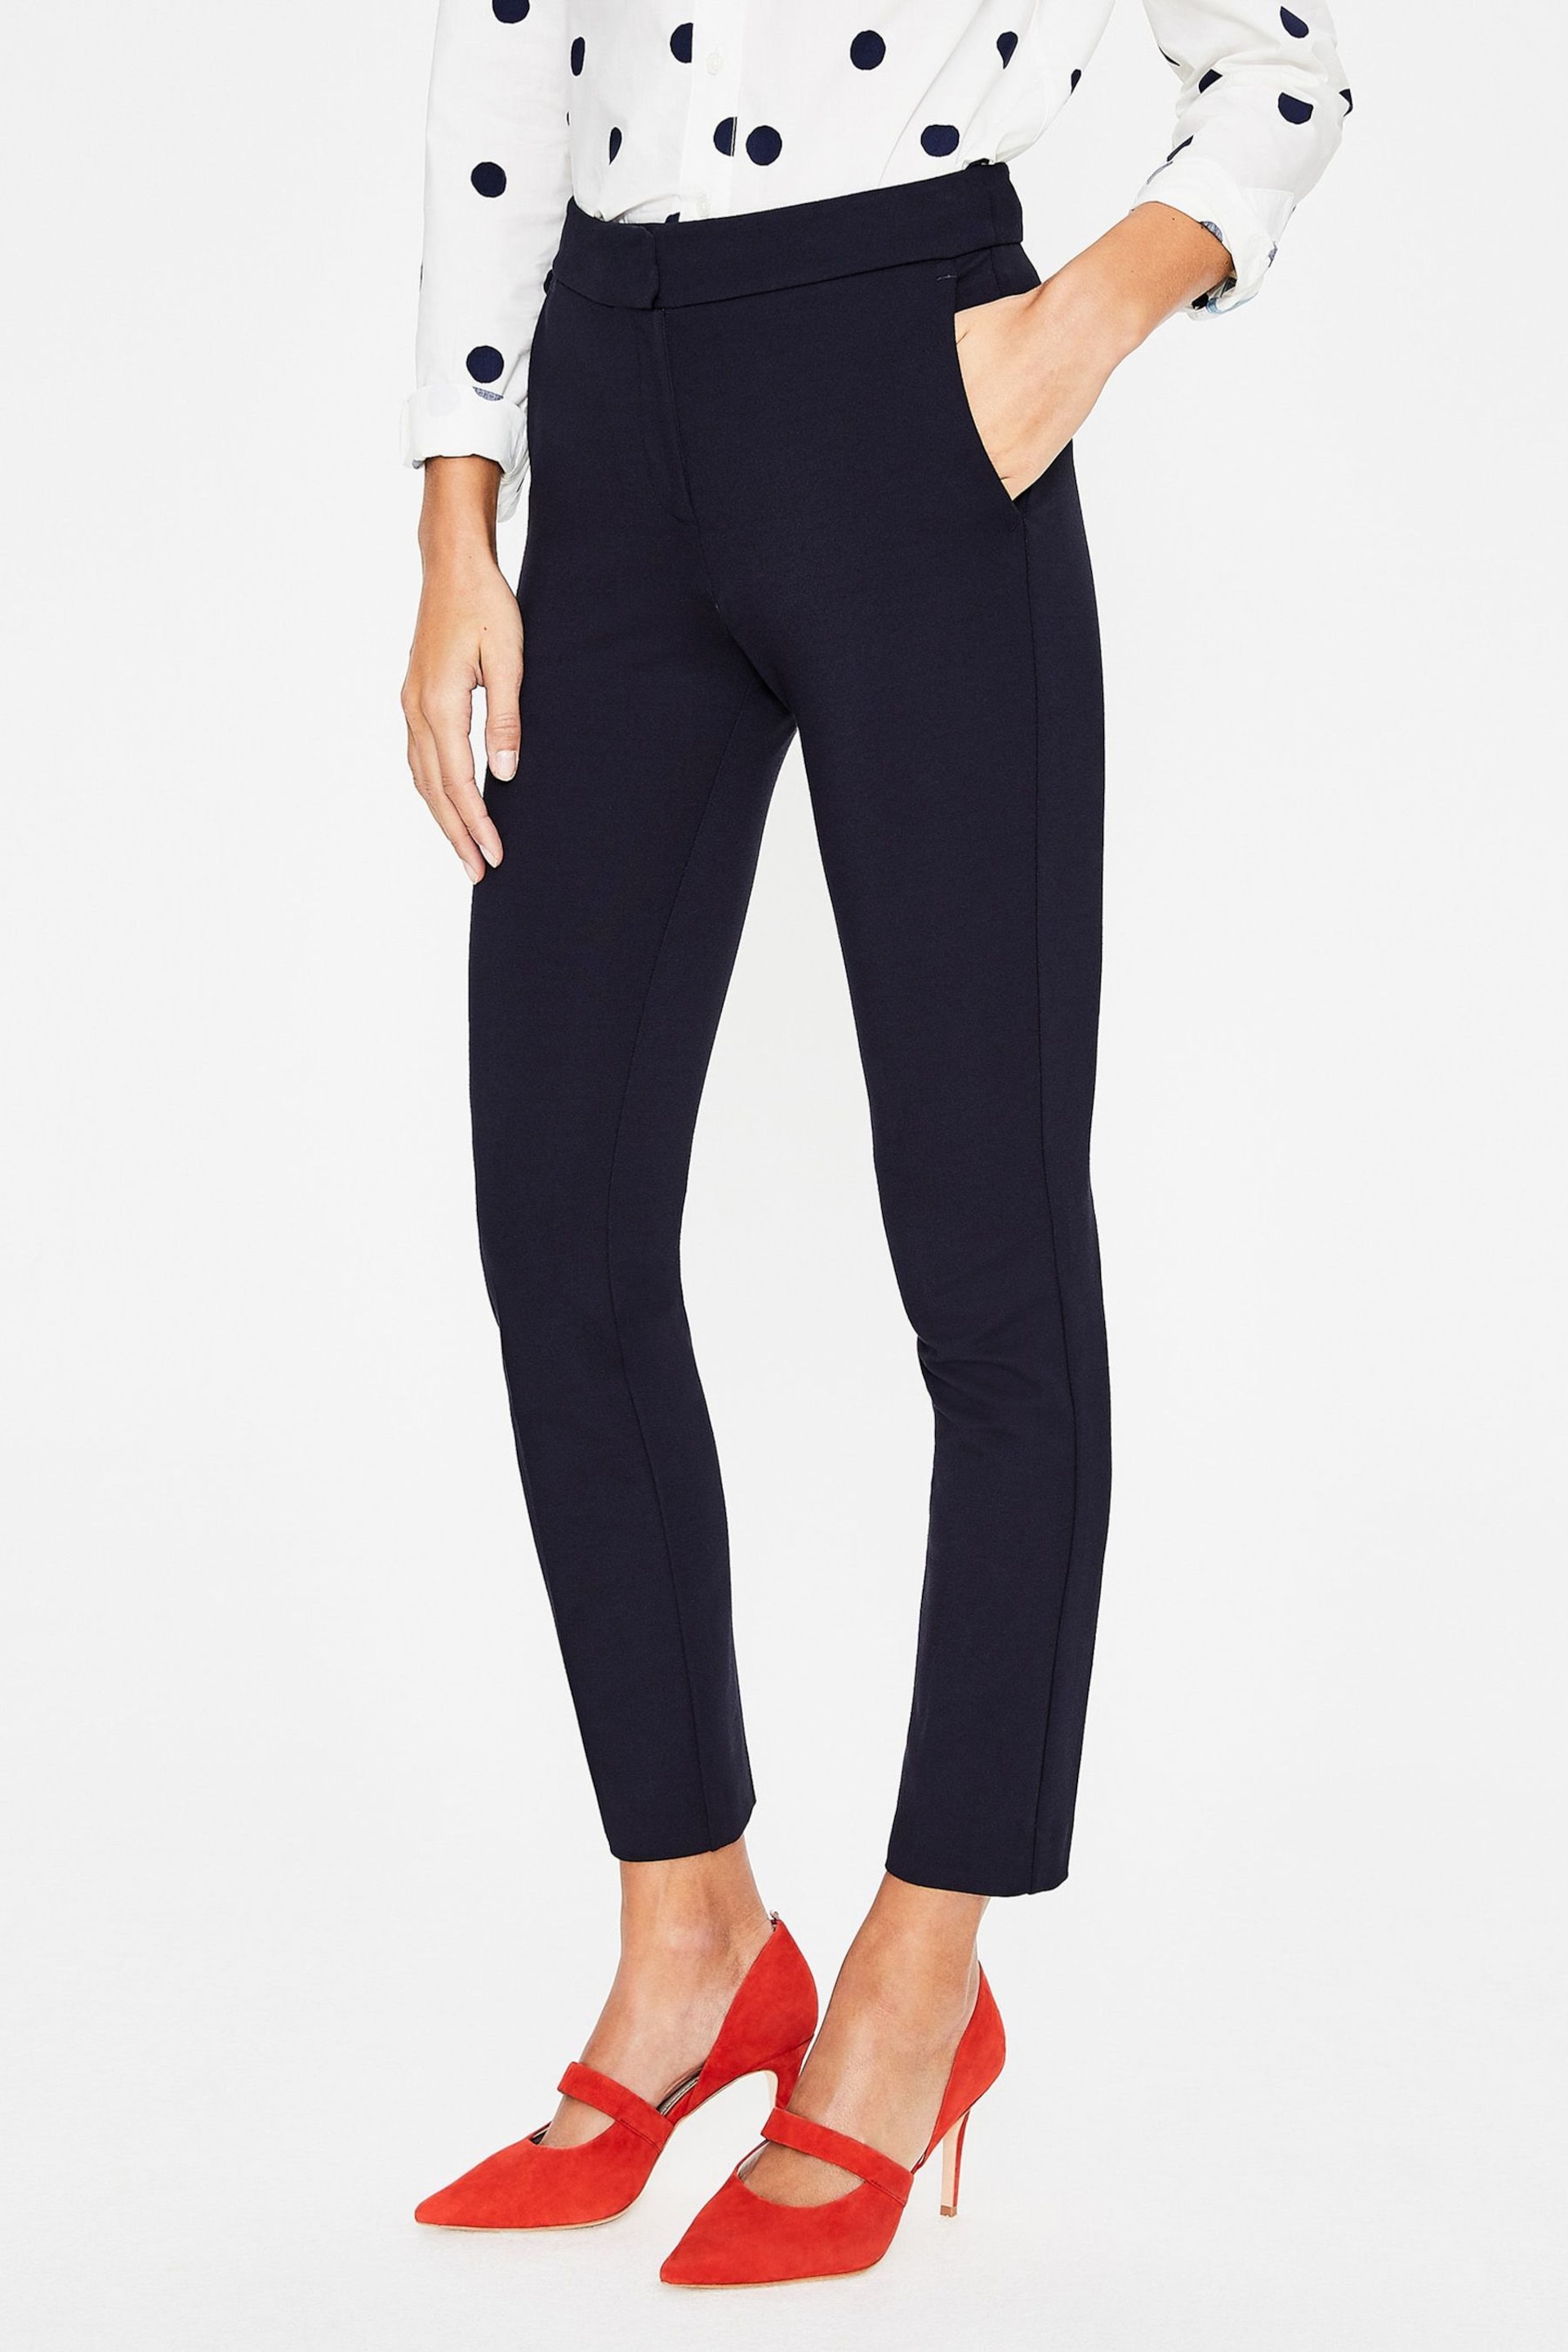 Boden Navy Blue Hampshire 7/8 Trousers - Image 1 of 6